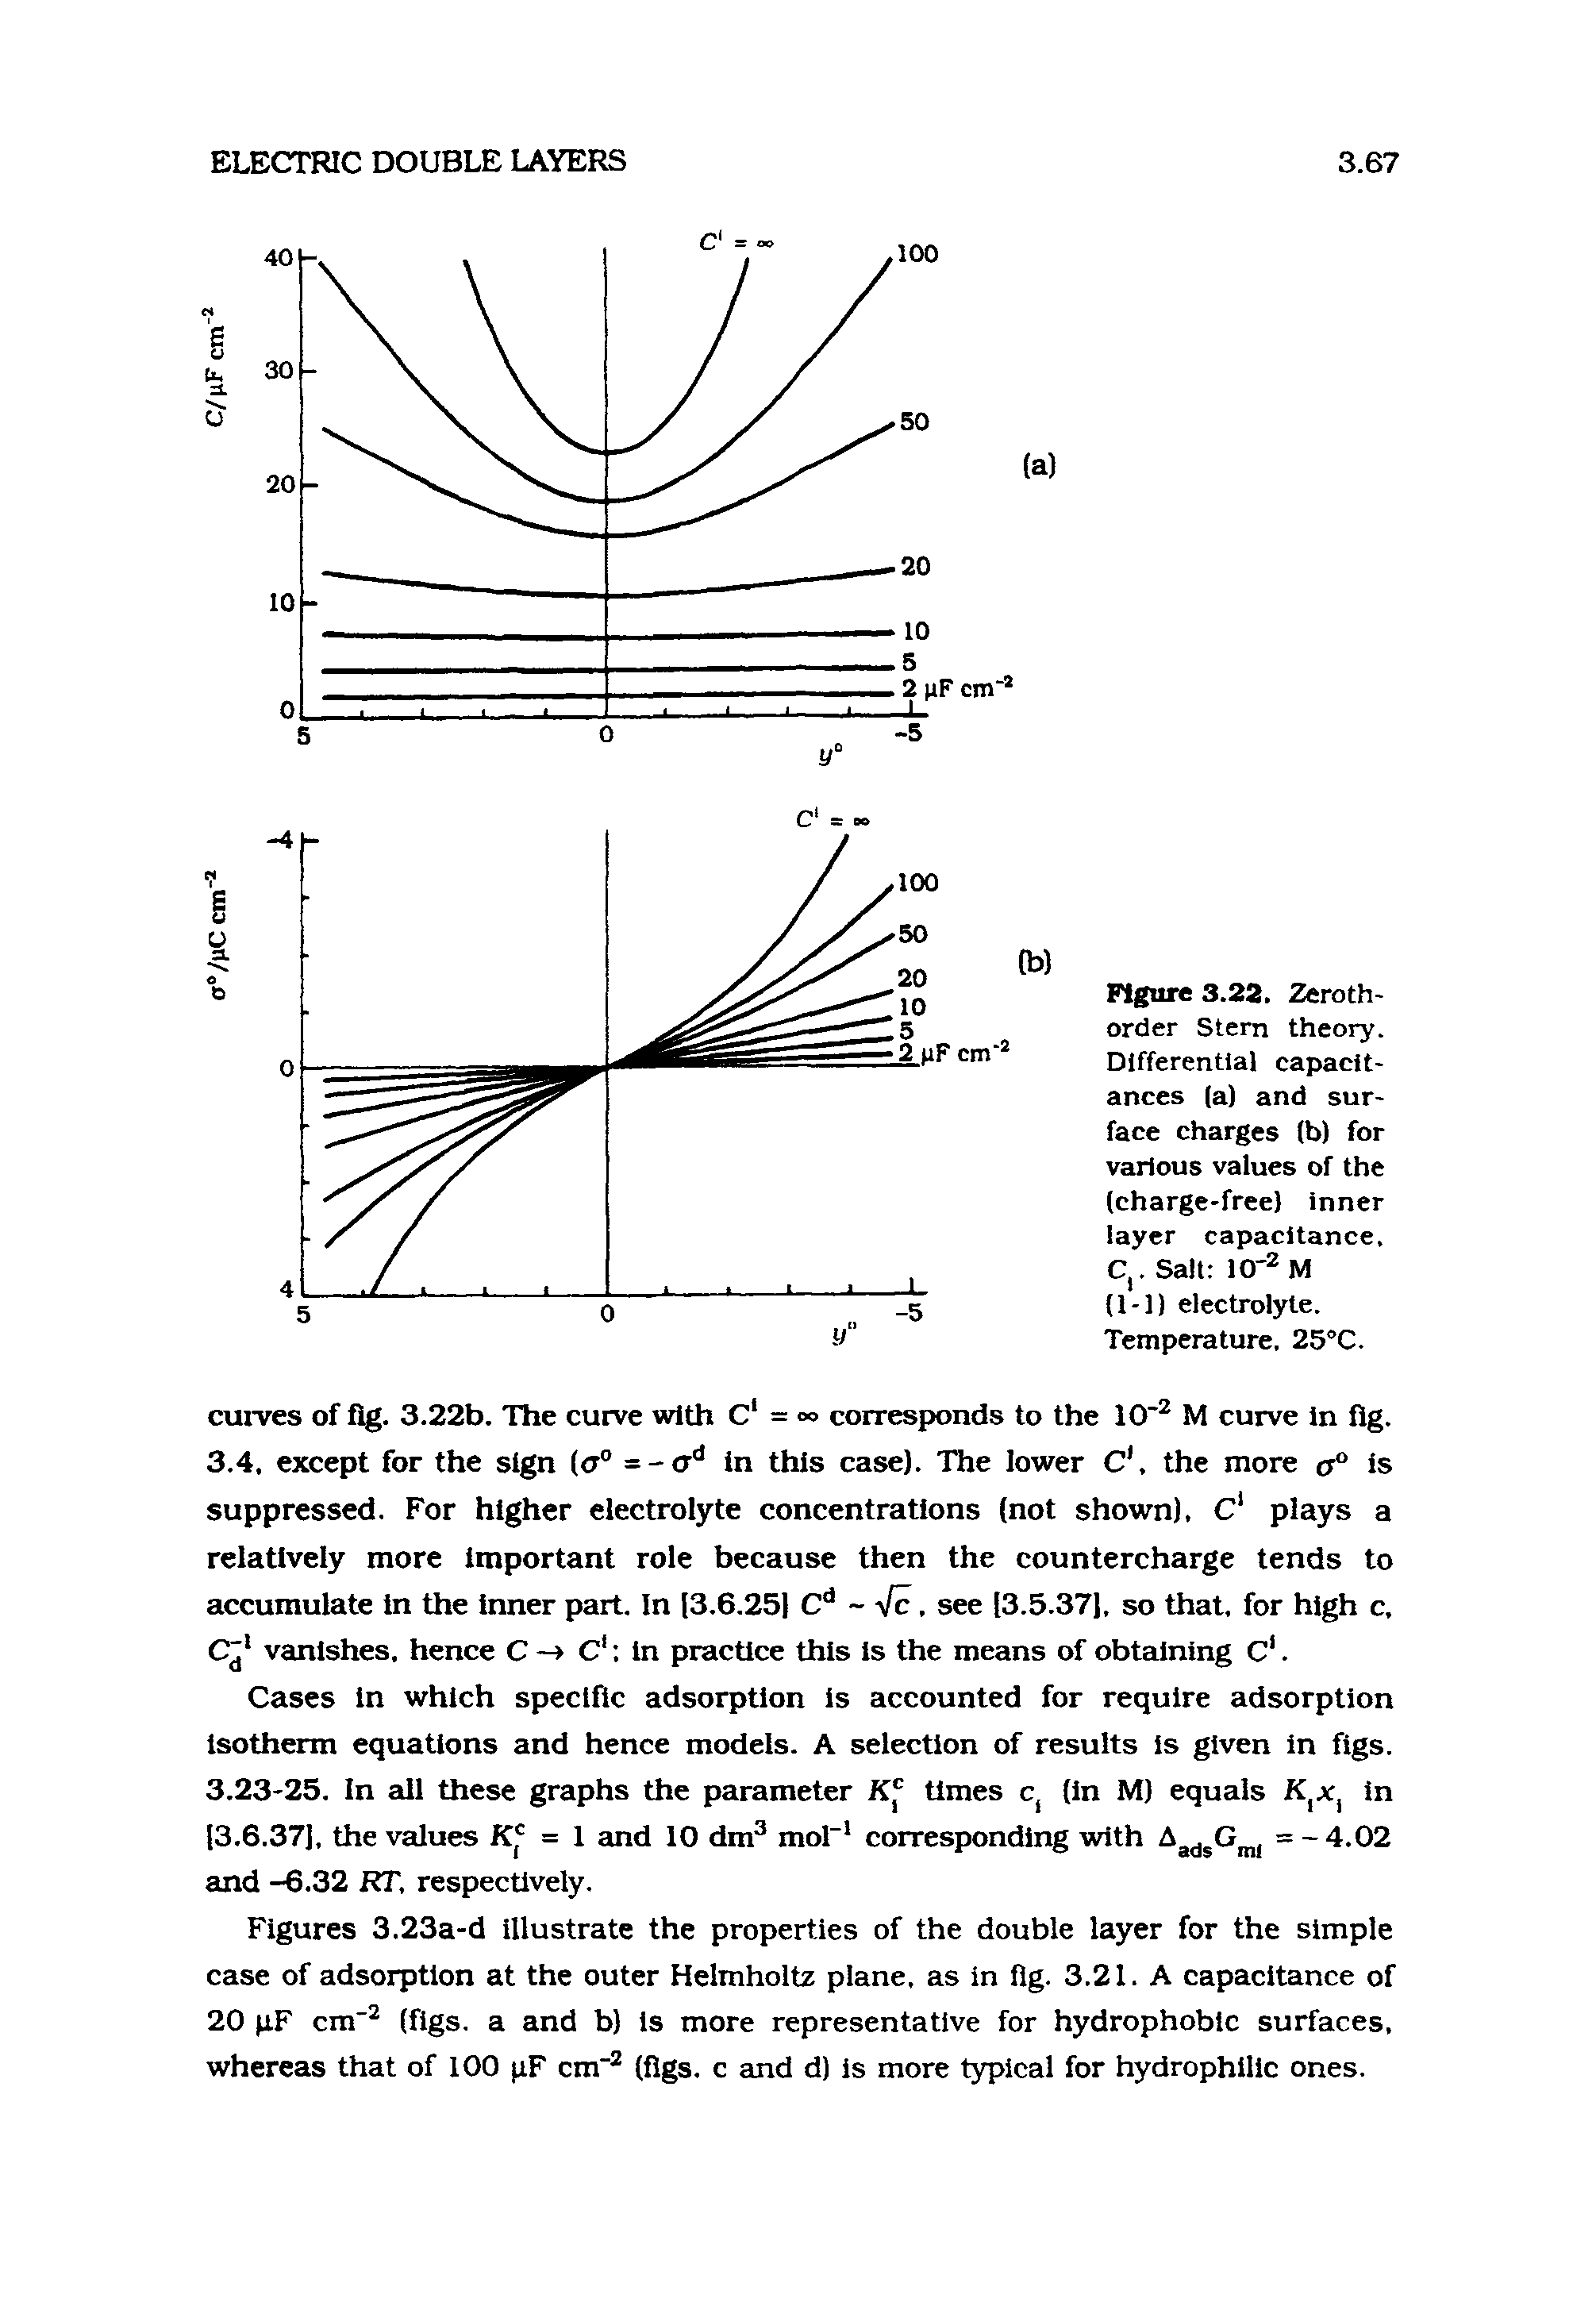 Figure 3.22, Zeroth-order Stern theory. Differential capacitances (a) and surface charges (b) for various values of the (charge-free) inner layer capacitance, C,. Salt 10 = M (1-1) electrolyte. Temperature, 25°C.